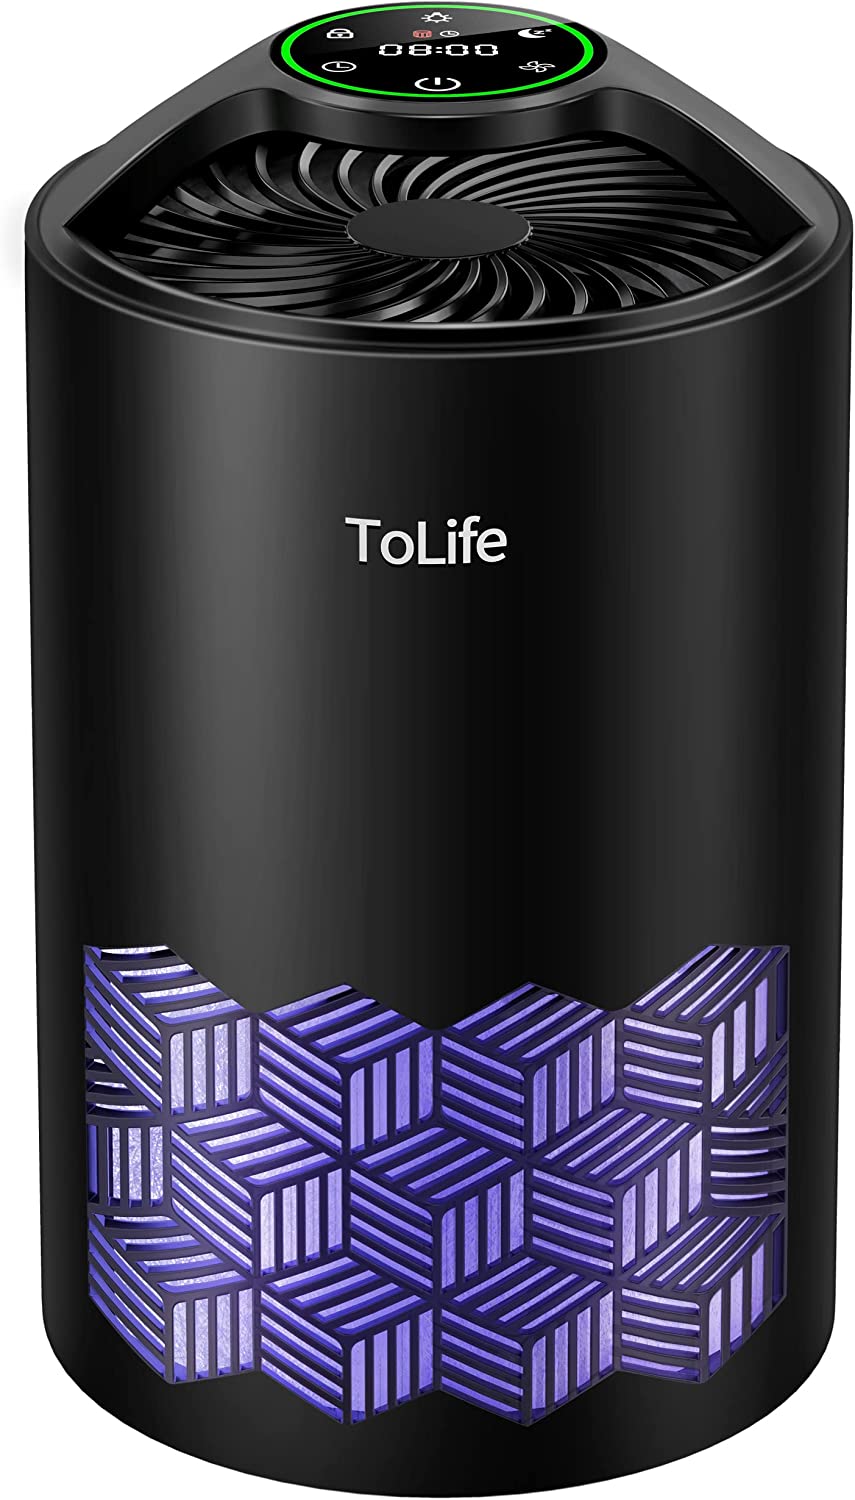 ToLife Air Purifiers for Home with H13 True HEPA Filter, Air Purifier for Home Large Room Cleans up to 215 Sq. Ft and Filters 99.9% of Allergens, Pet Dander, Dust, 25dB Quiet Air Cleaner for Bedroom- Black